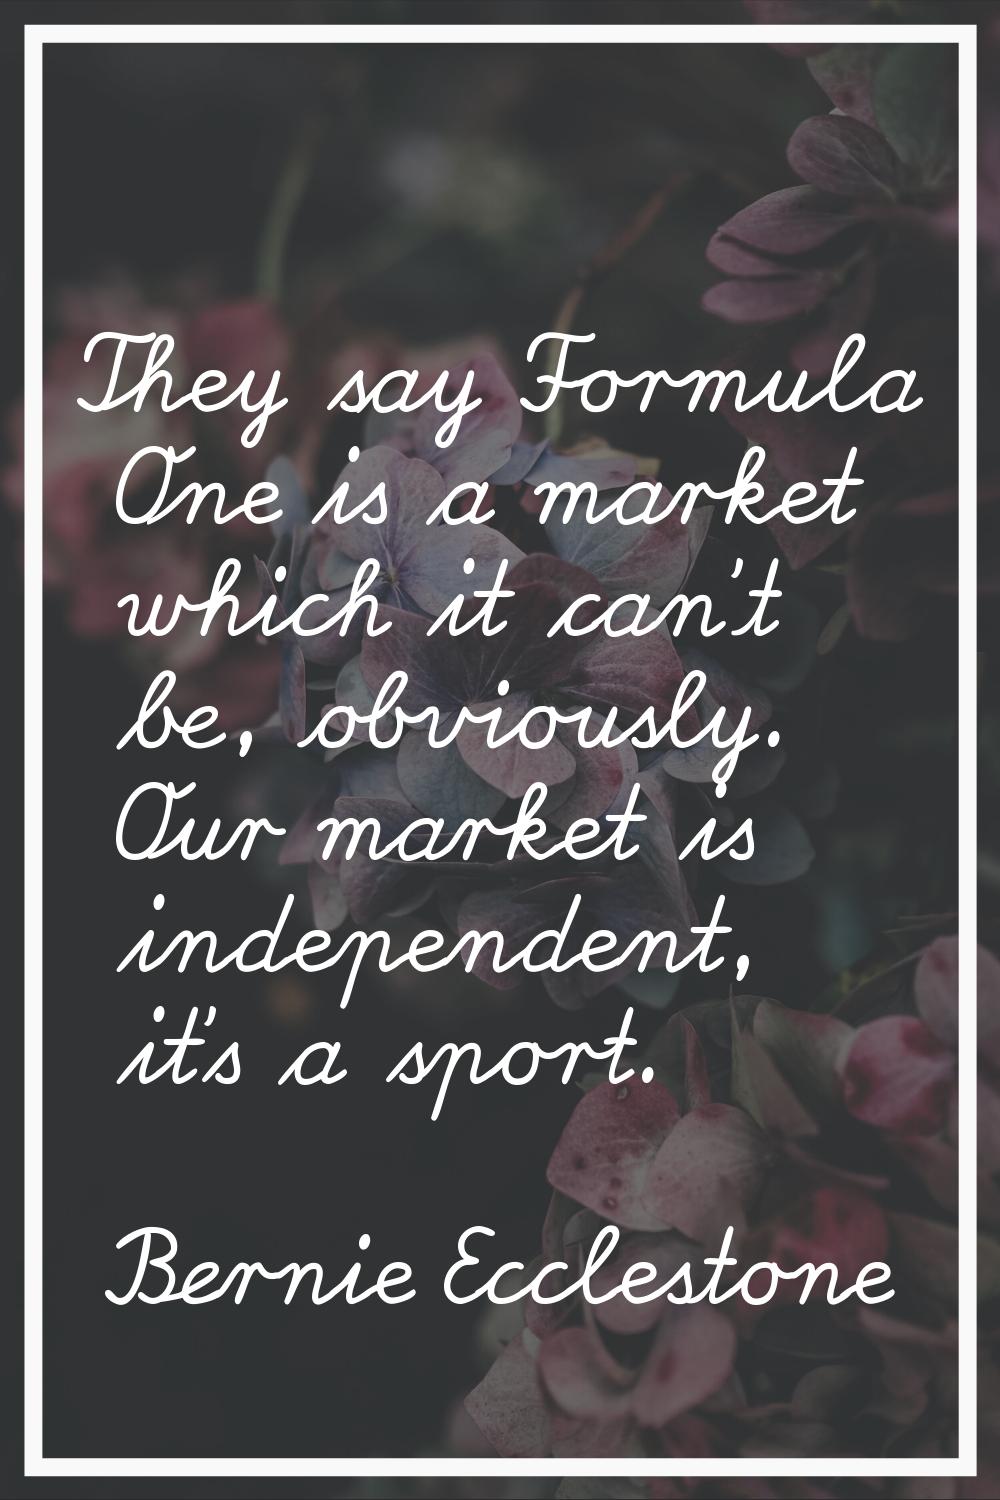 They say Formula One is a market which it can't be, obviously. Our market is independent, it's a sp